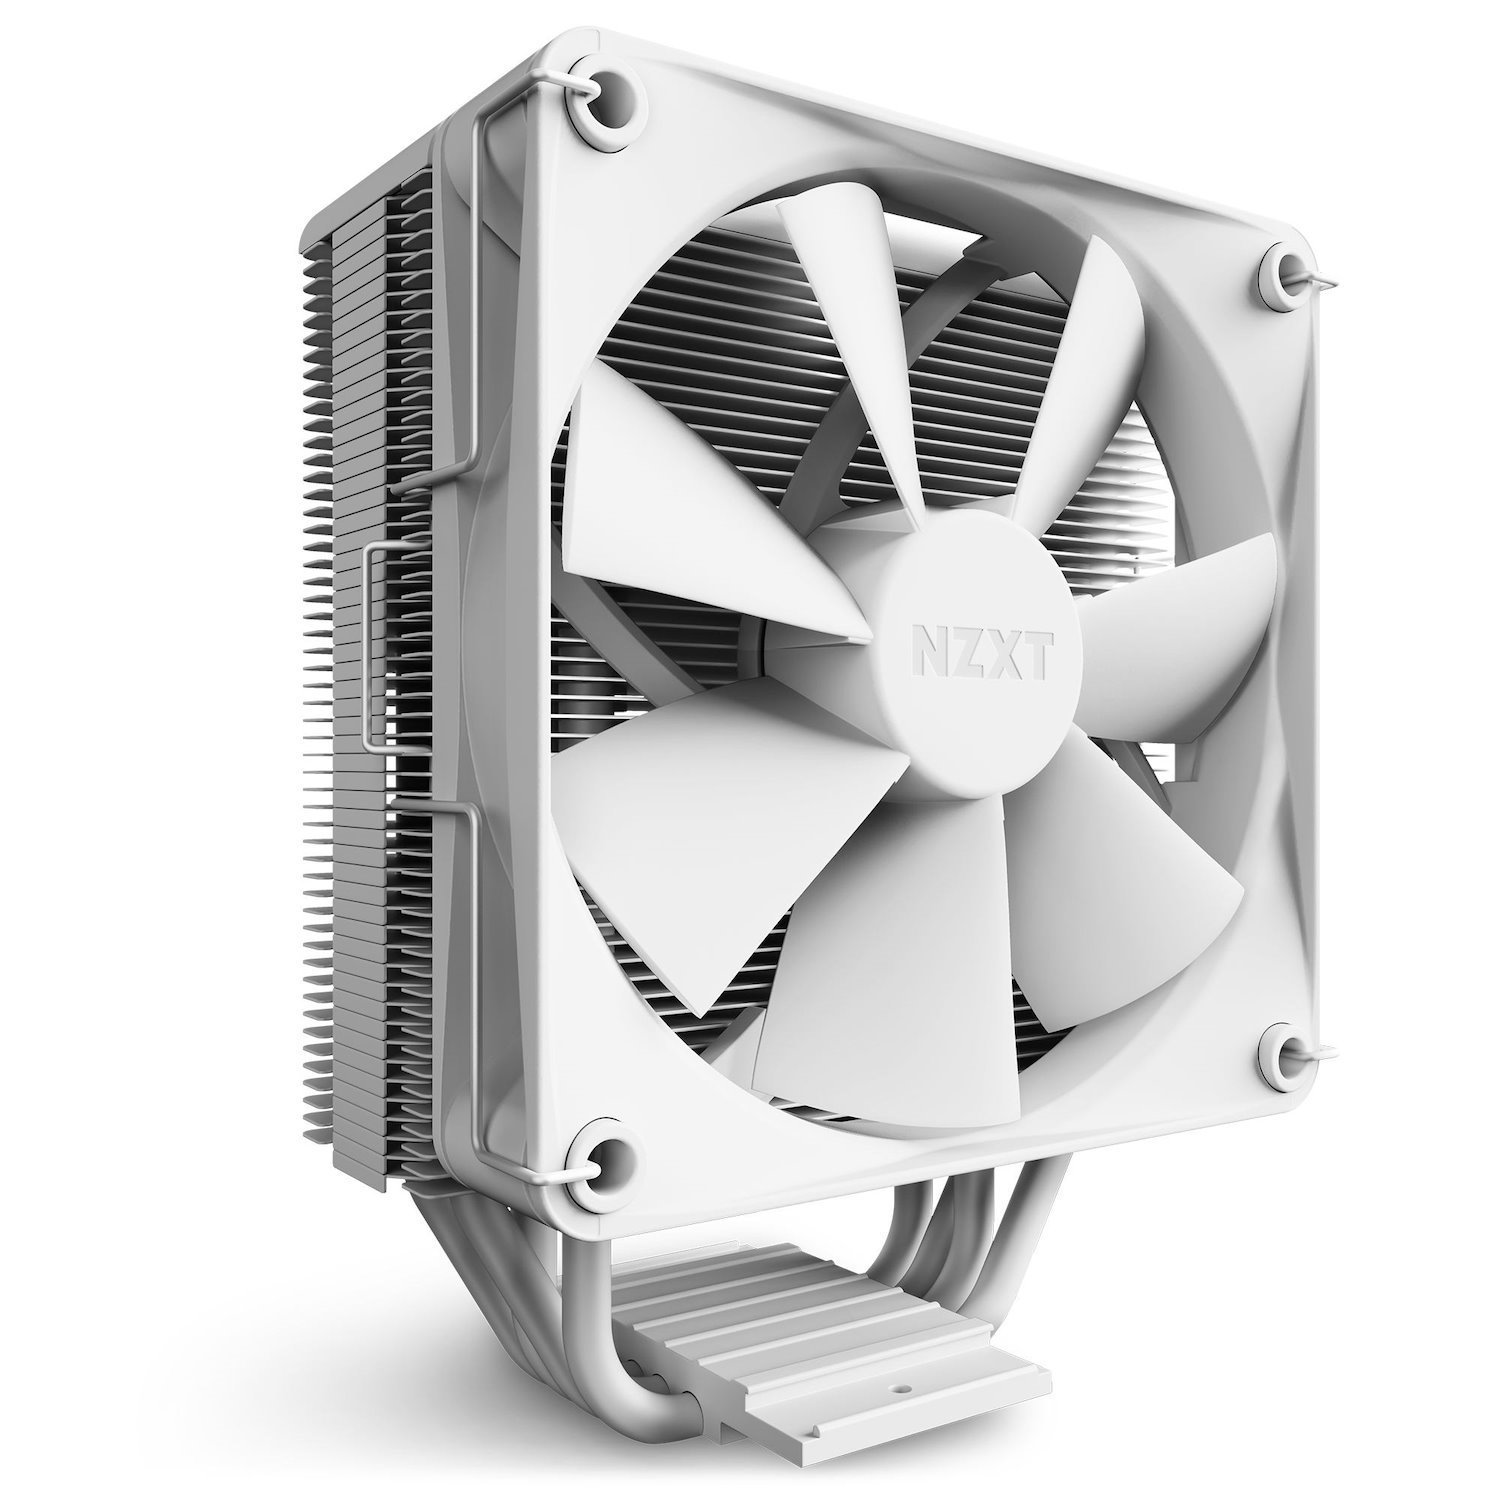 NZXT T120 Processor Air Cooler 12 CM White 1 PC[S] (NZXT T120 Performance 120MM Cpu Cooler - White)